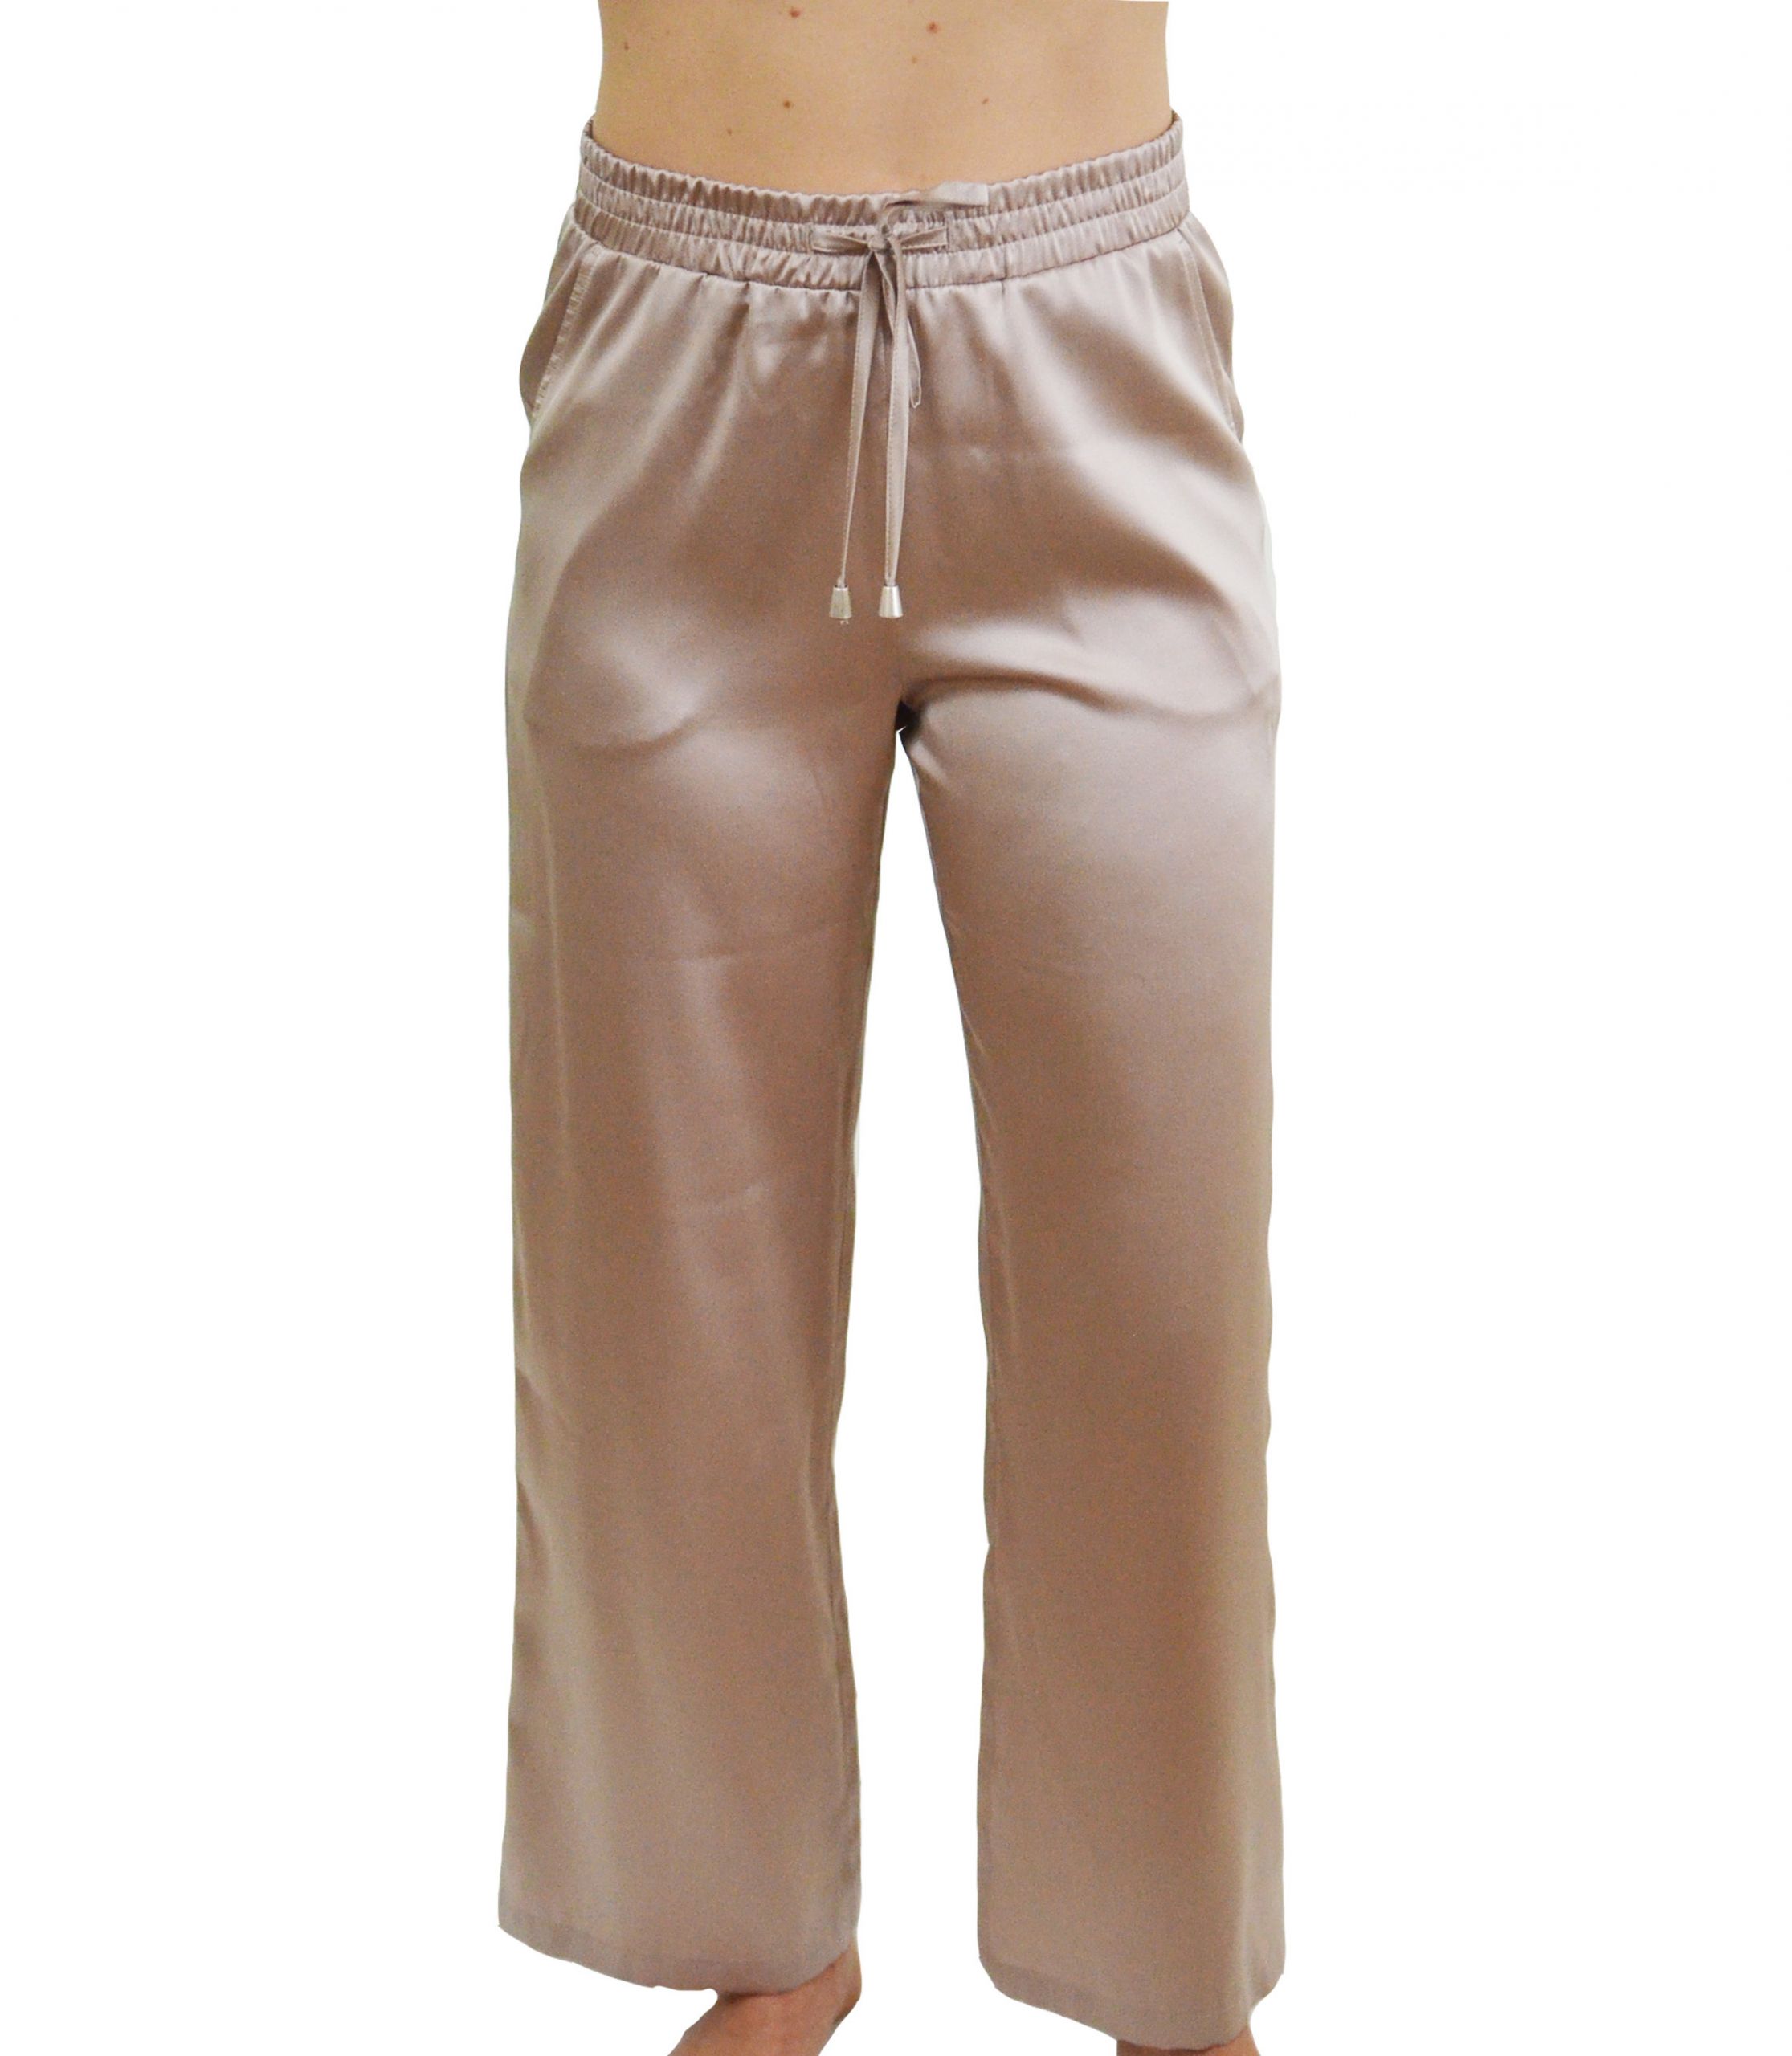 Lotti Silk Pants - The Garden Collection by MARCHA